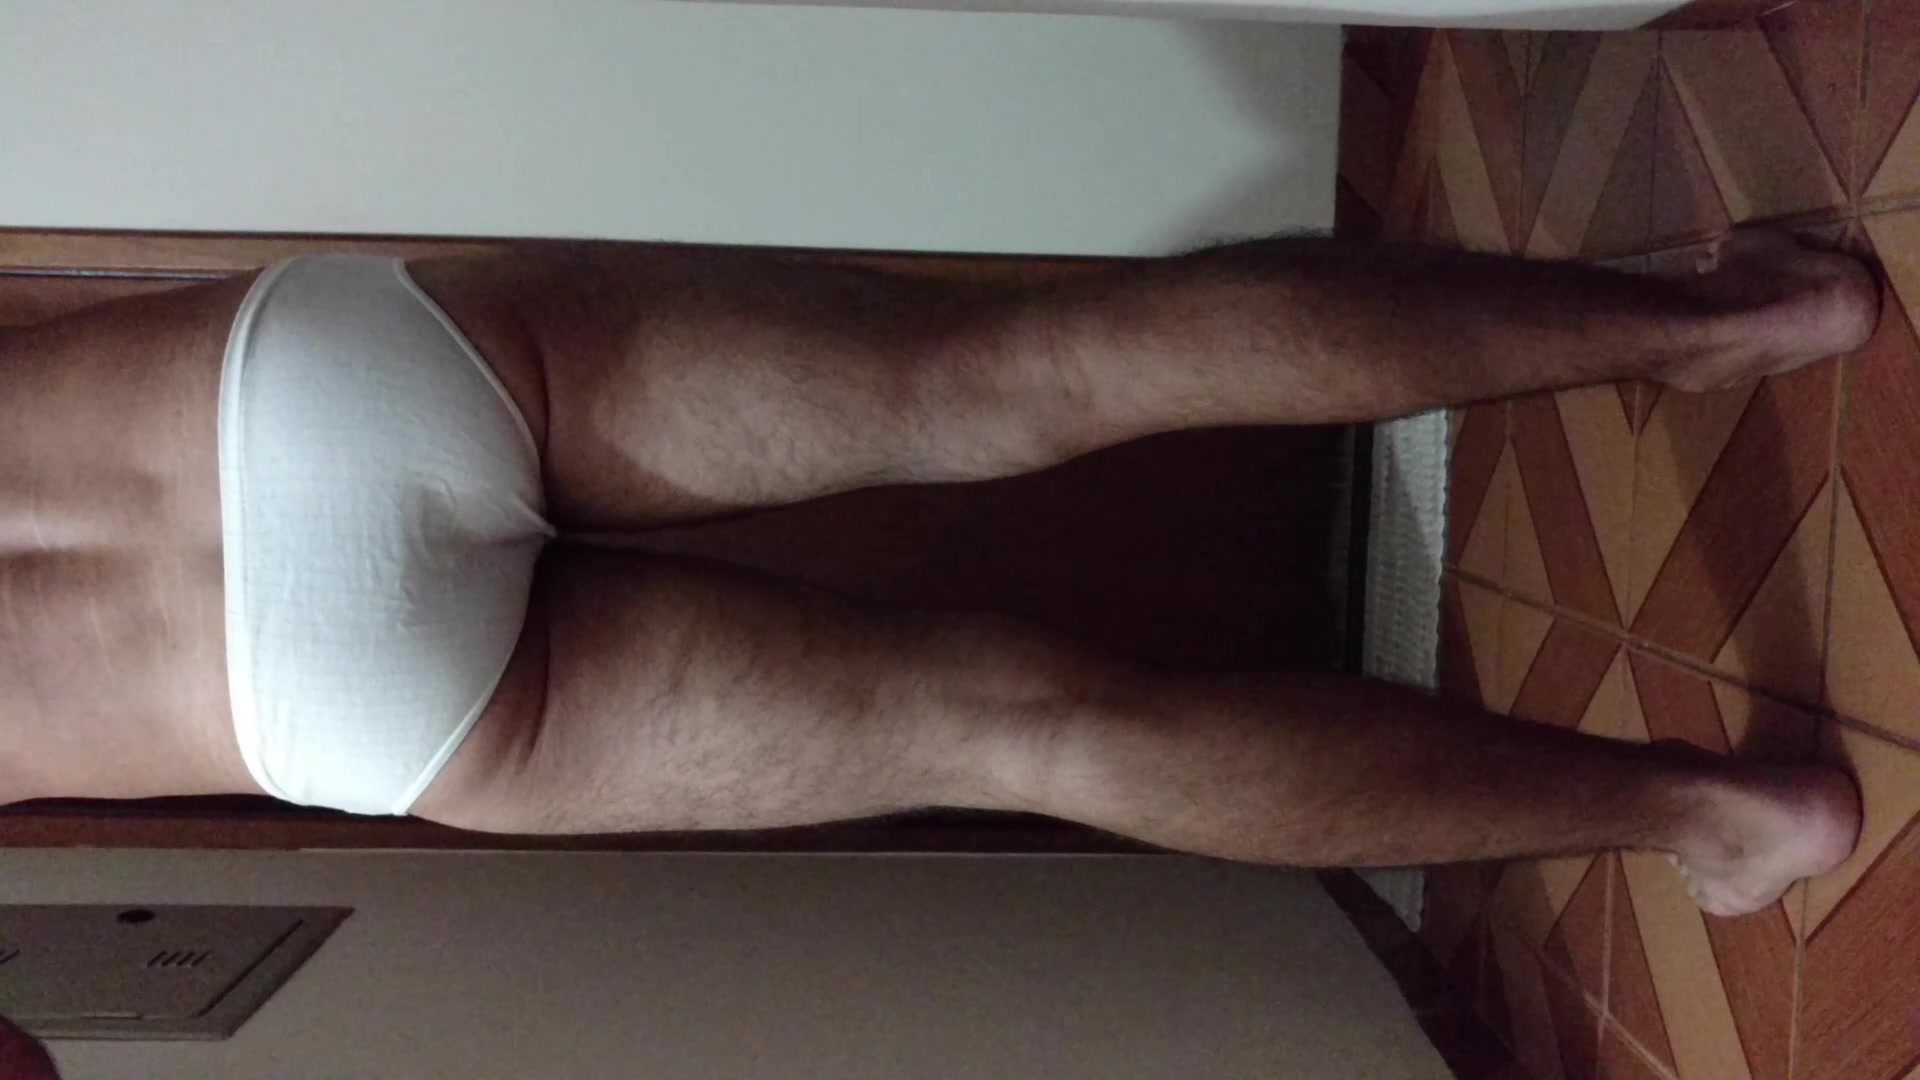 Pooping White briefs